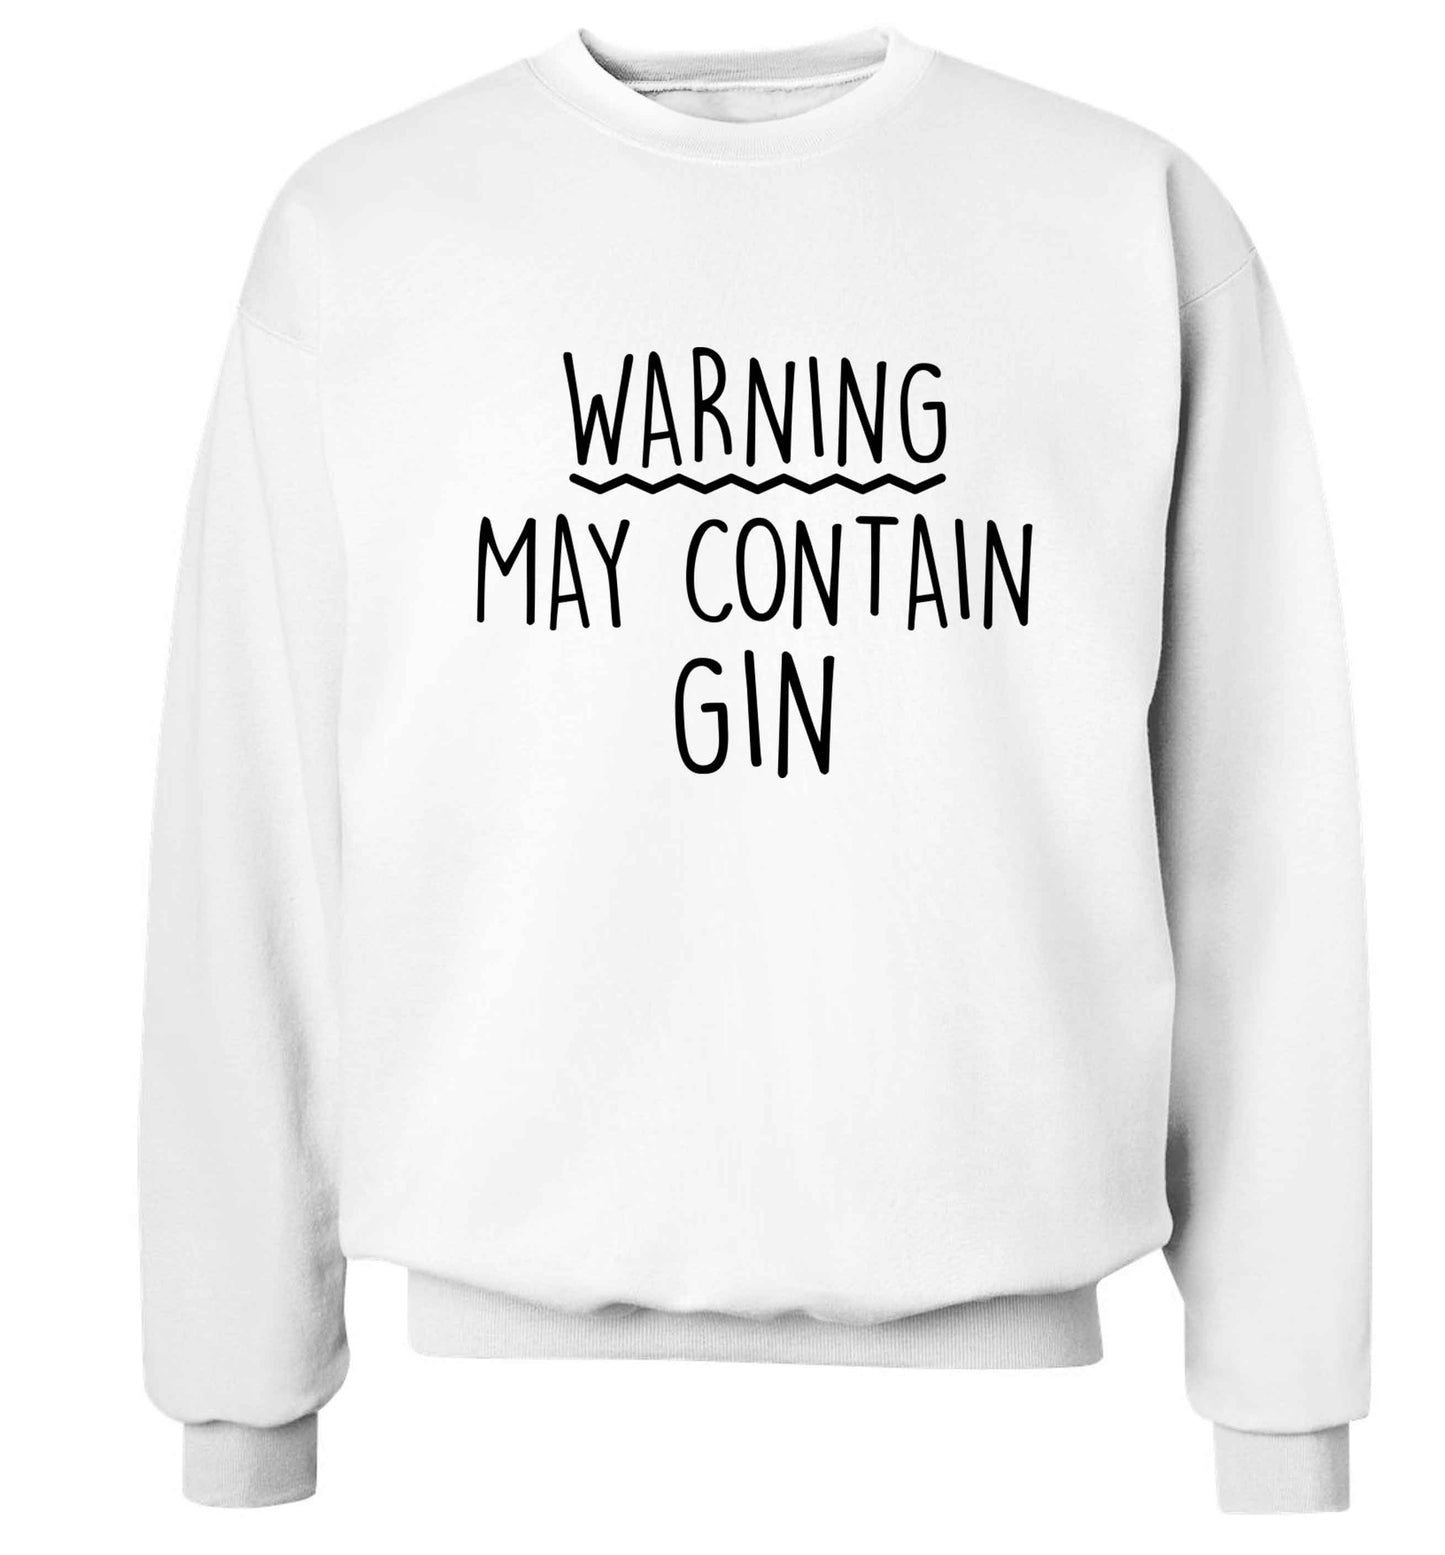 Warning may contain gin Adult's unisex white Sweater 2XL